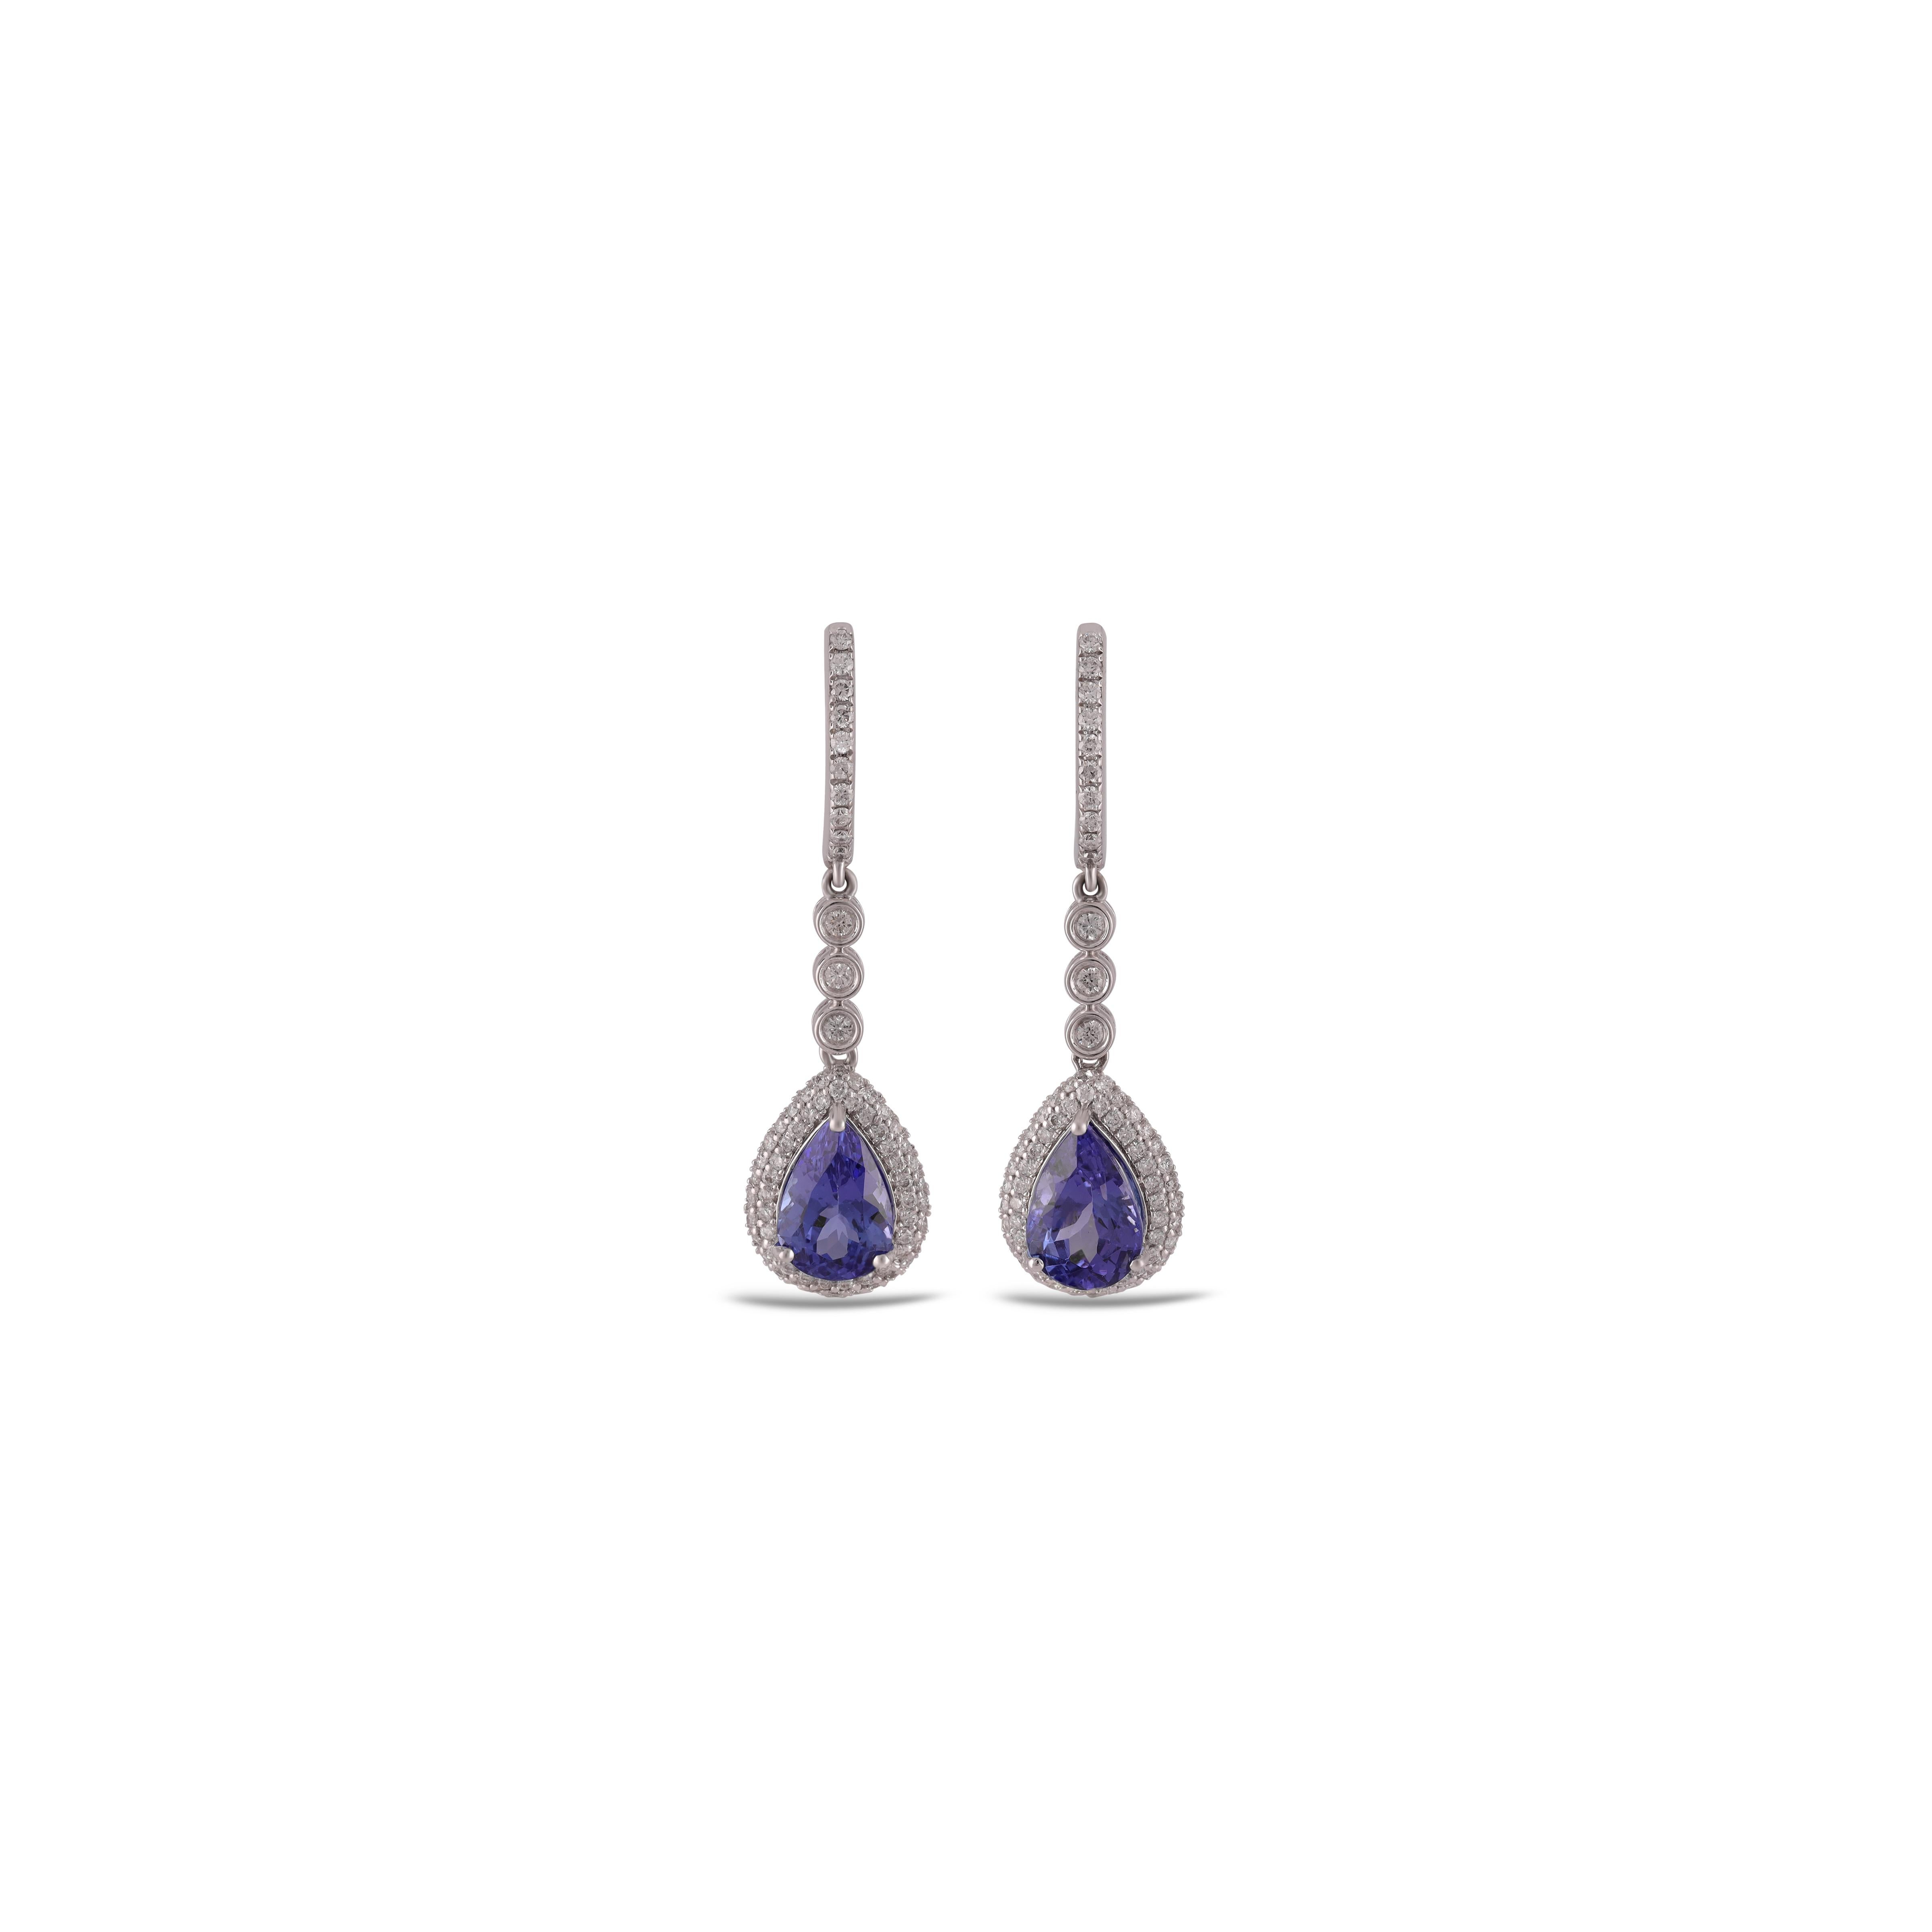 If you are looking for tanzanite earrings, this is the ultimate find, (3.34 carats) of the finest tanzanite color is the focal point. These tanzanite's are sourced near the foothills of Mt. Kilimanjaro in Tanzania. Perfectly matched in color, size,